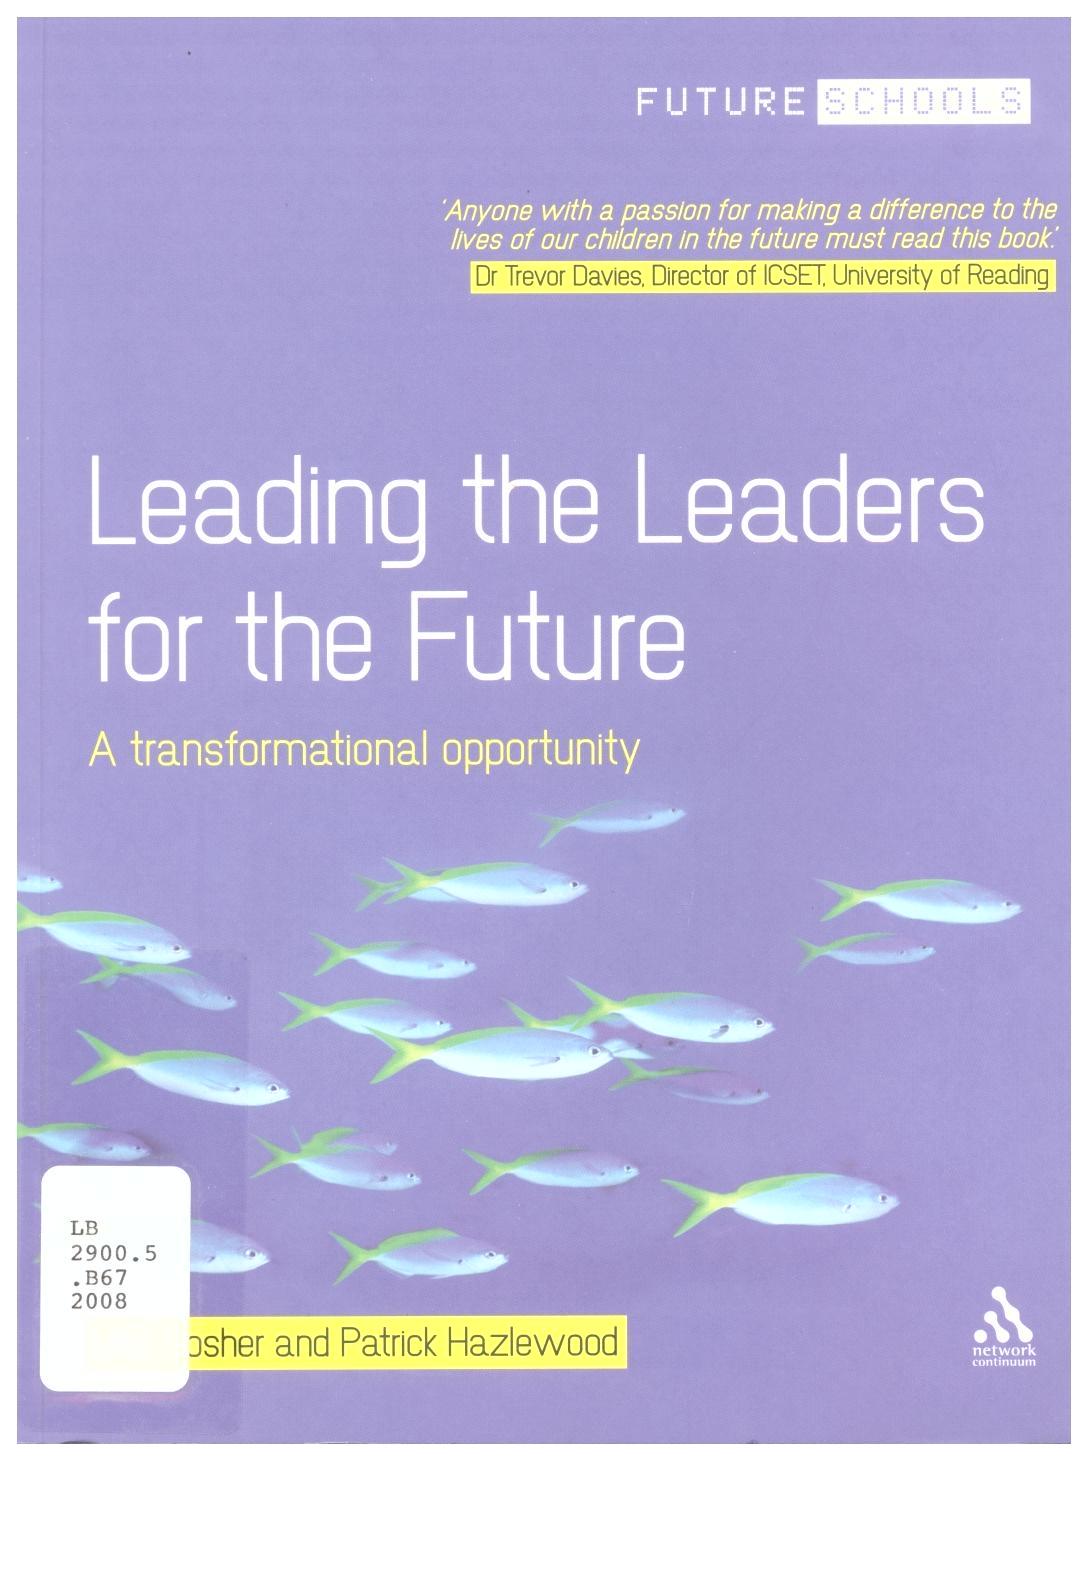 [Leading+the+Leaders+for+the+Future.jpg]